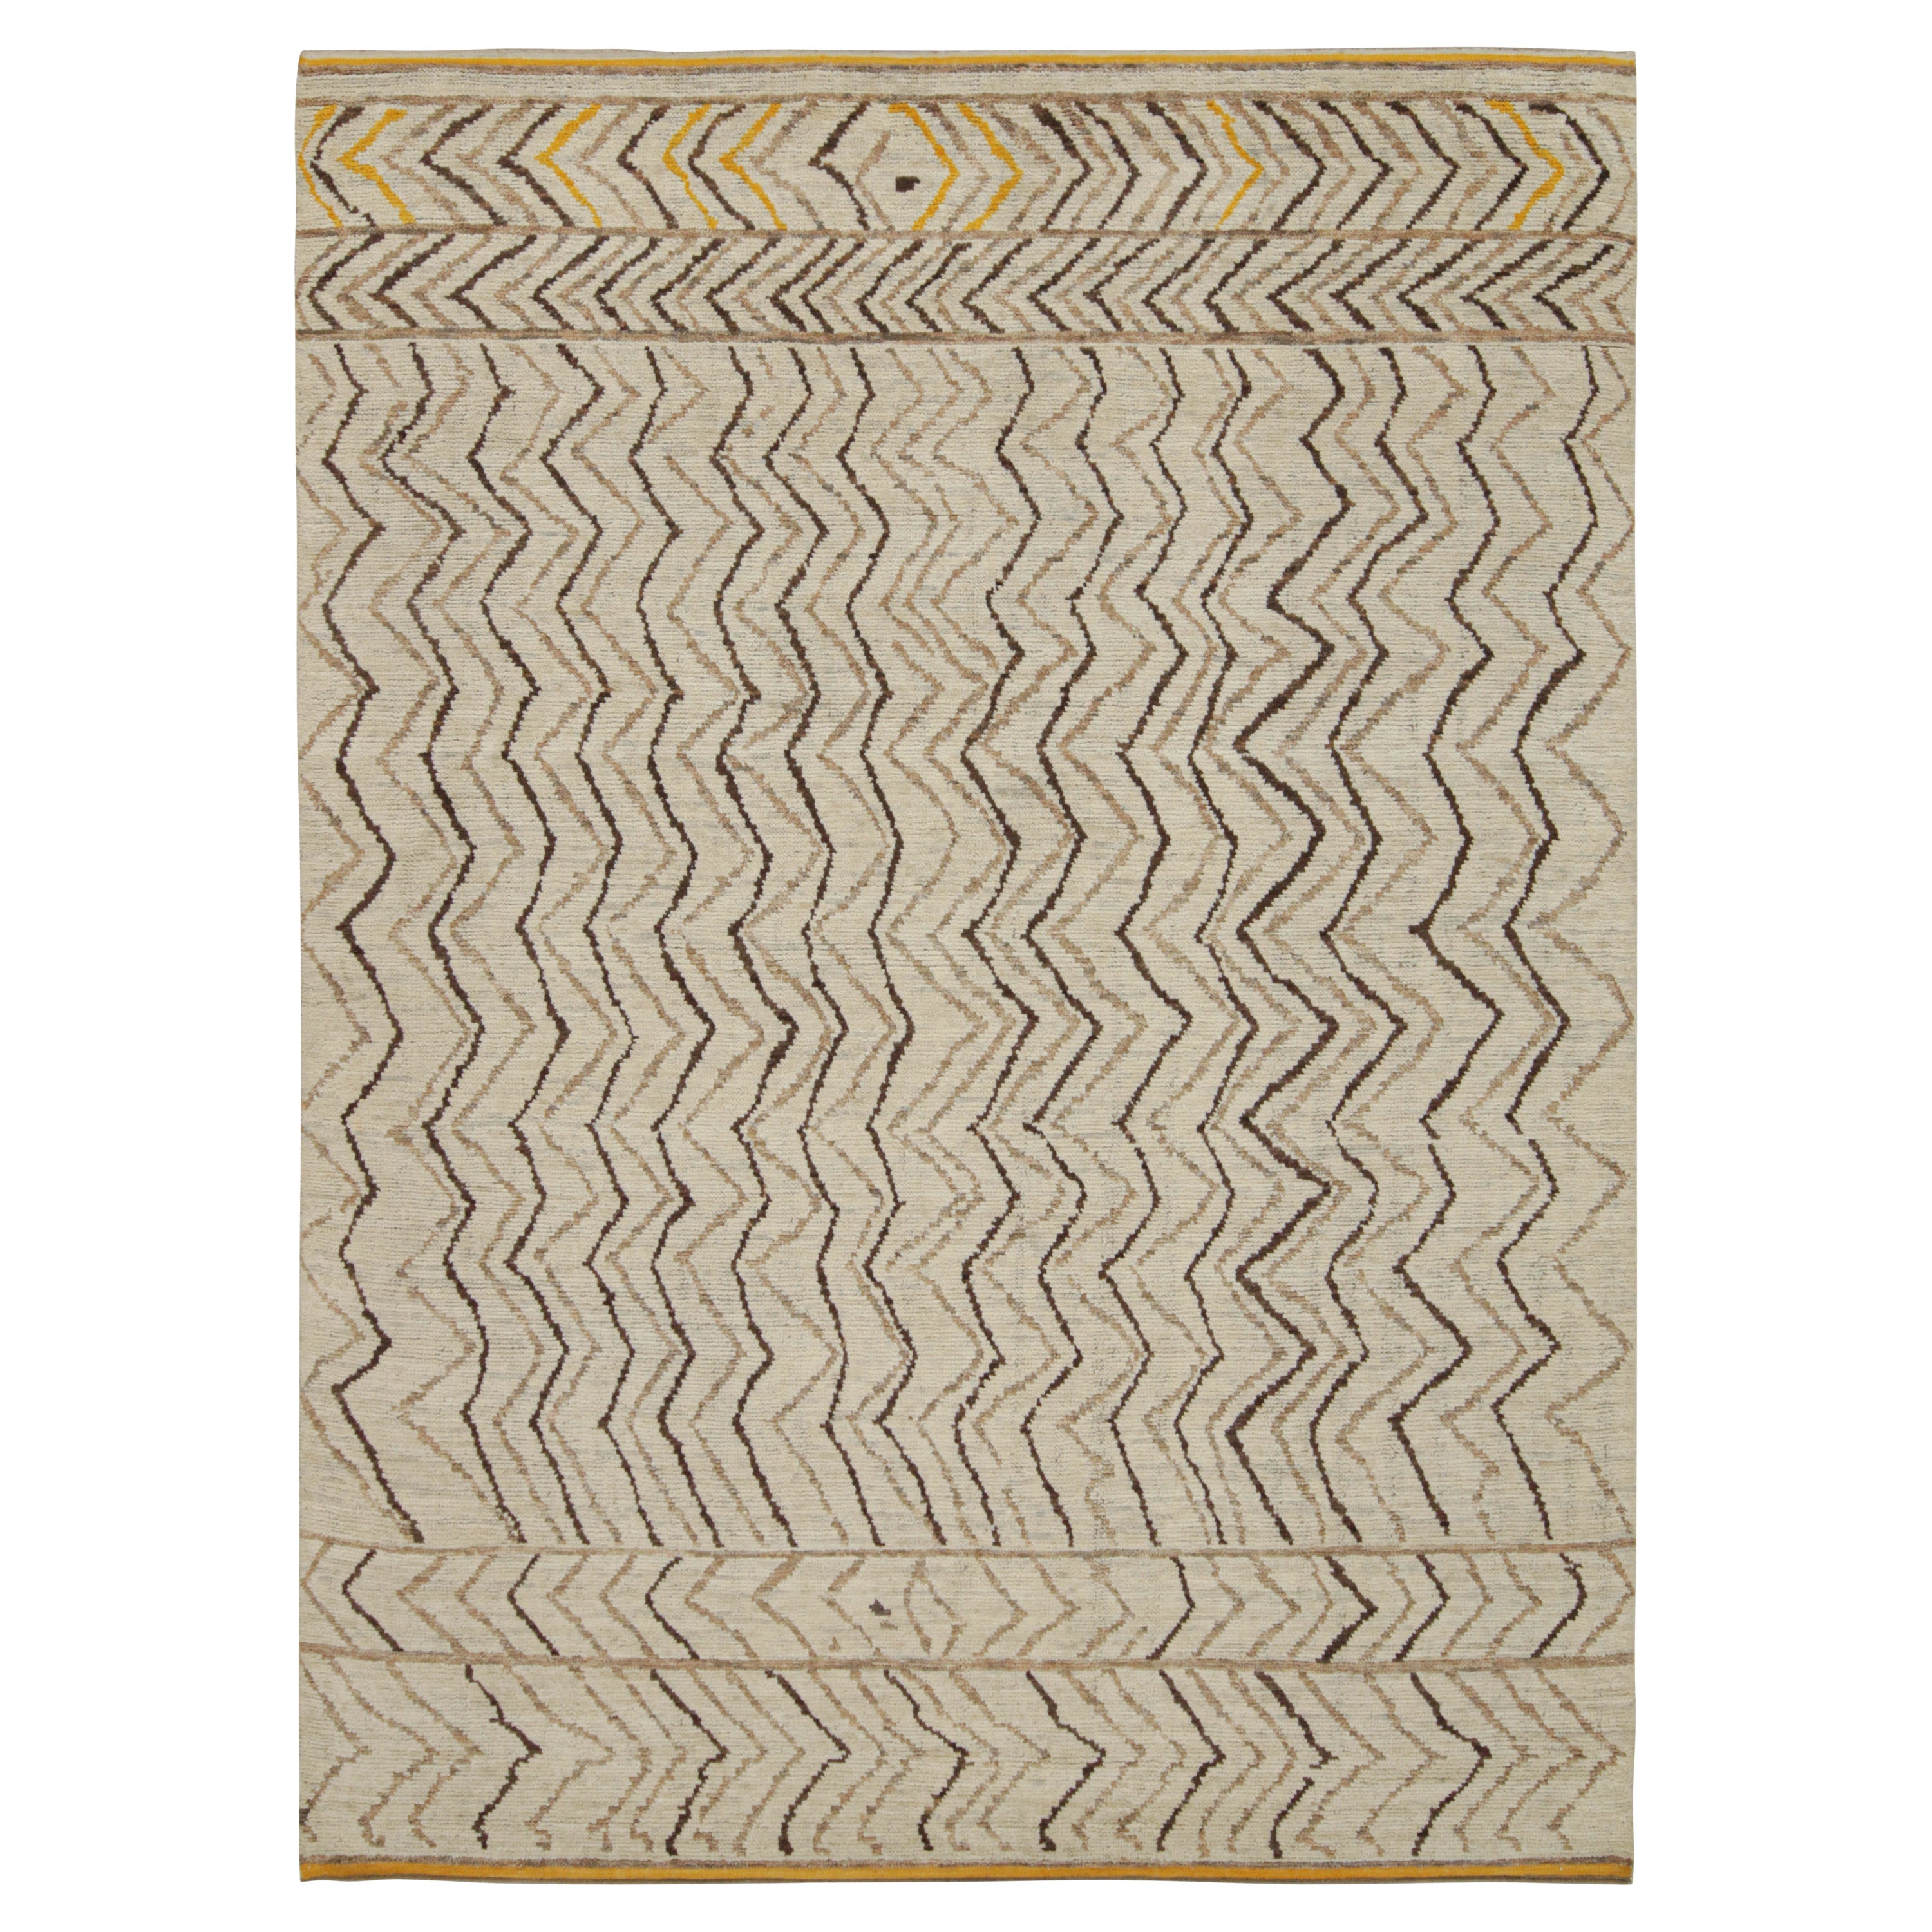 Rug & Kilim’s Moroccan Style Rug in Beige-Brown and Gold Geometric Patterns For Sale